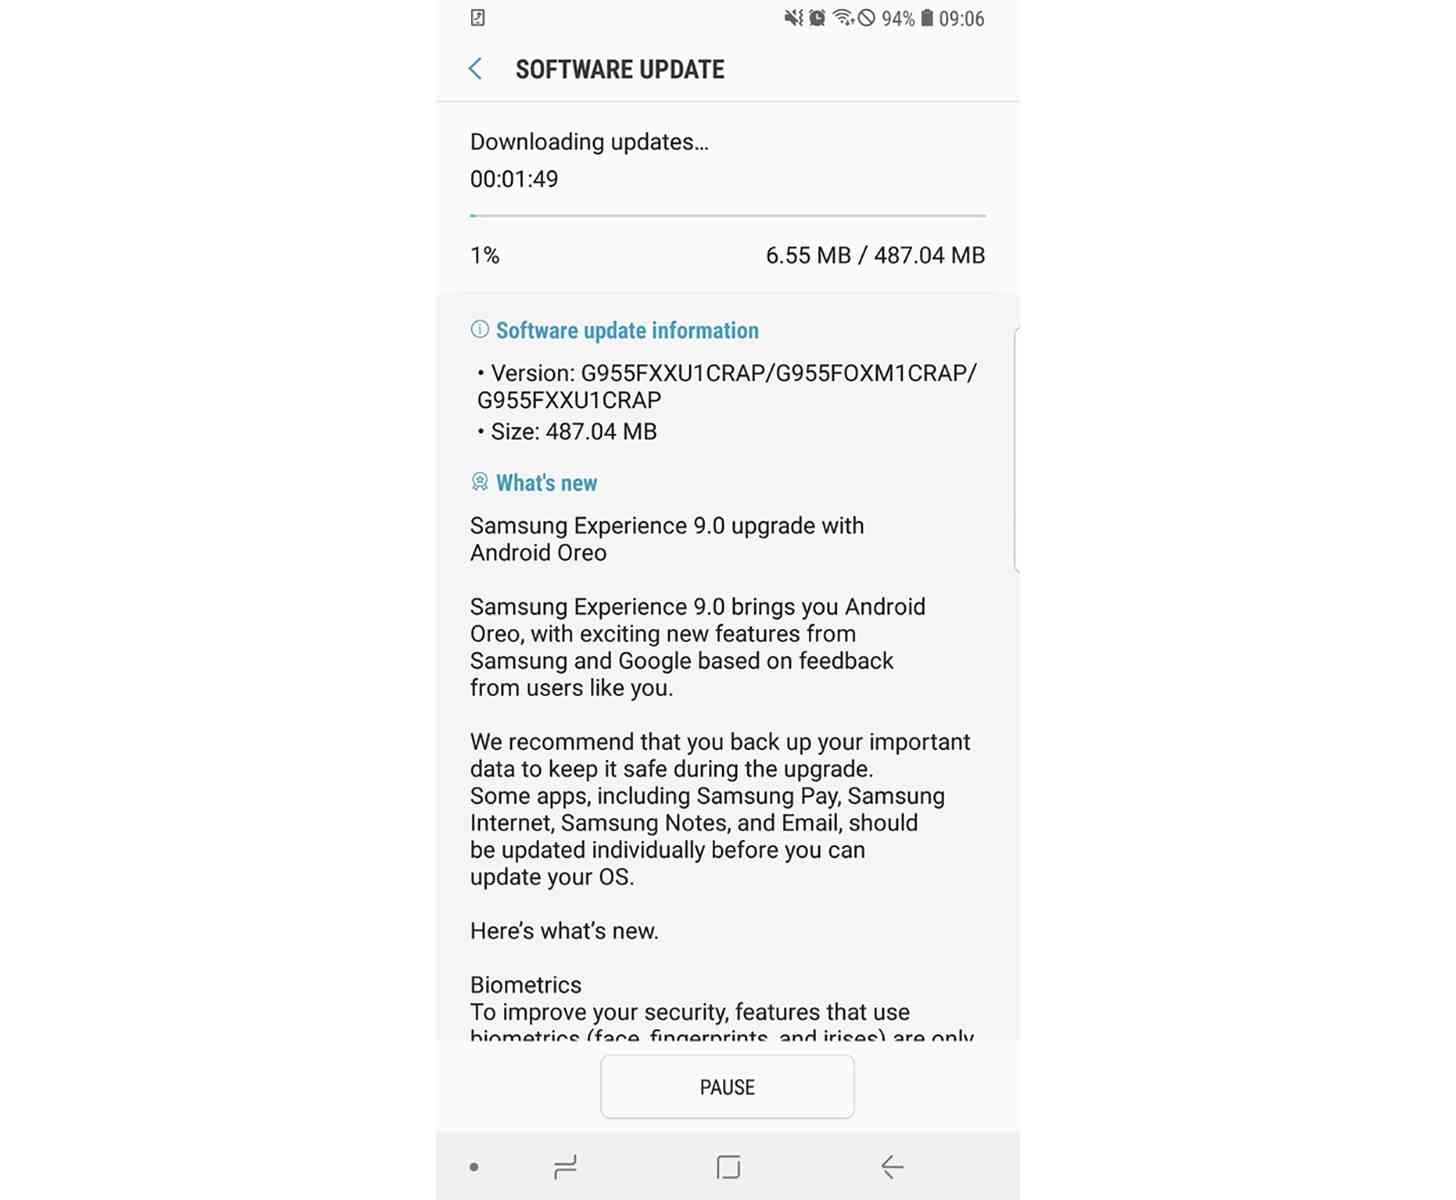 Samsung Galaxy S8 Android 8.0 Oreo update